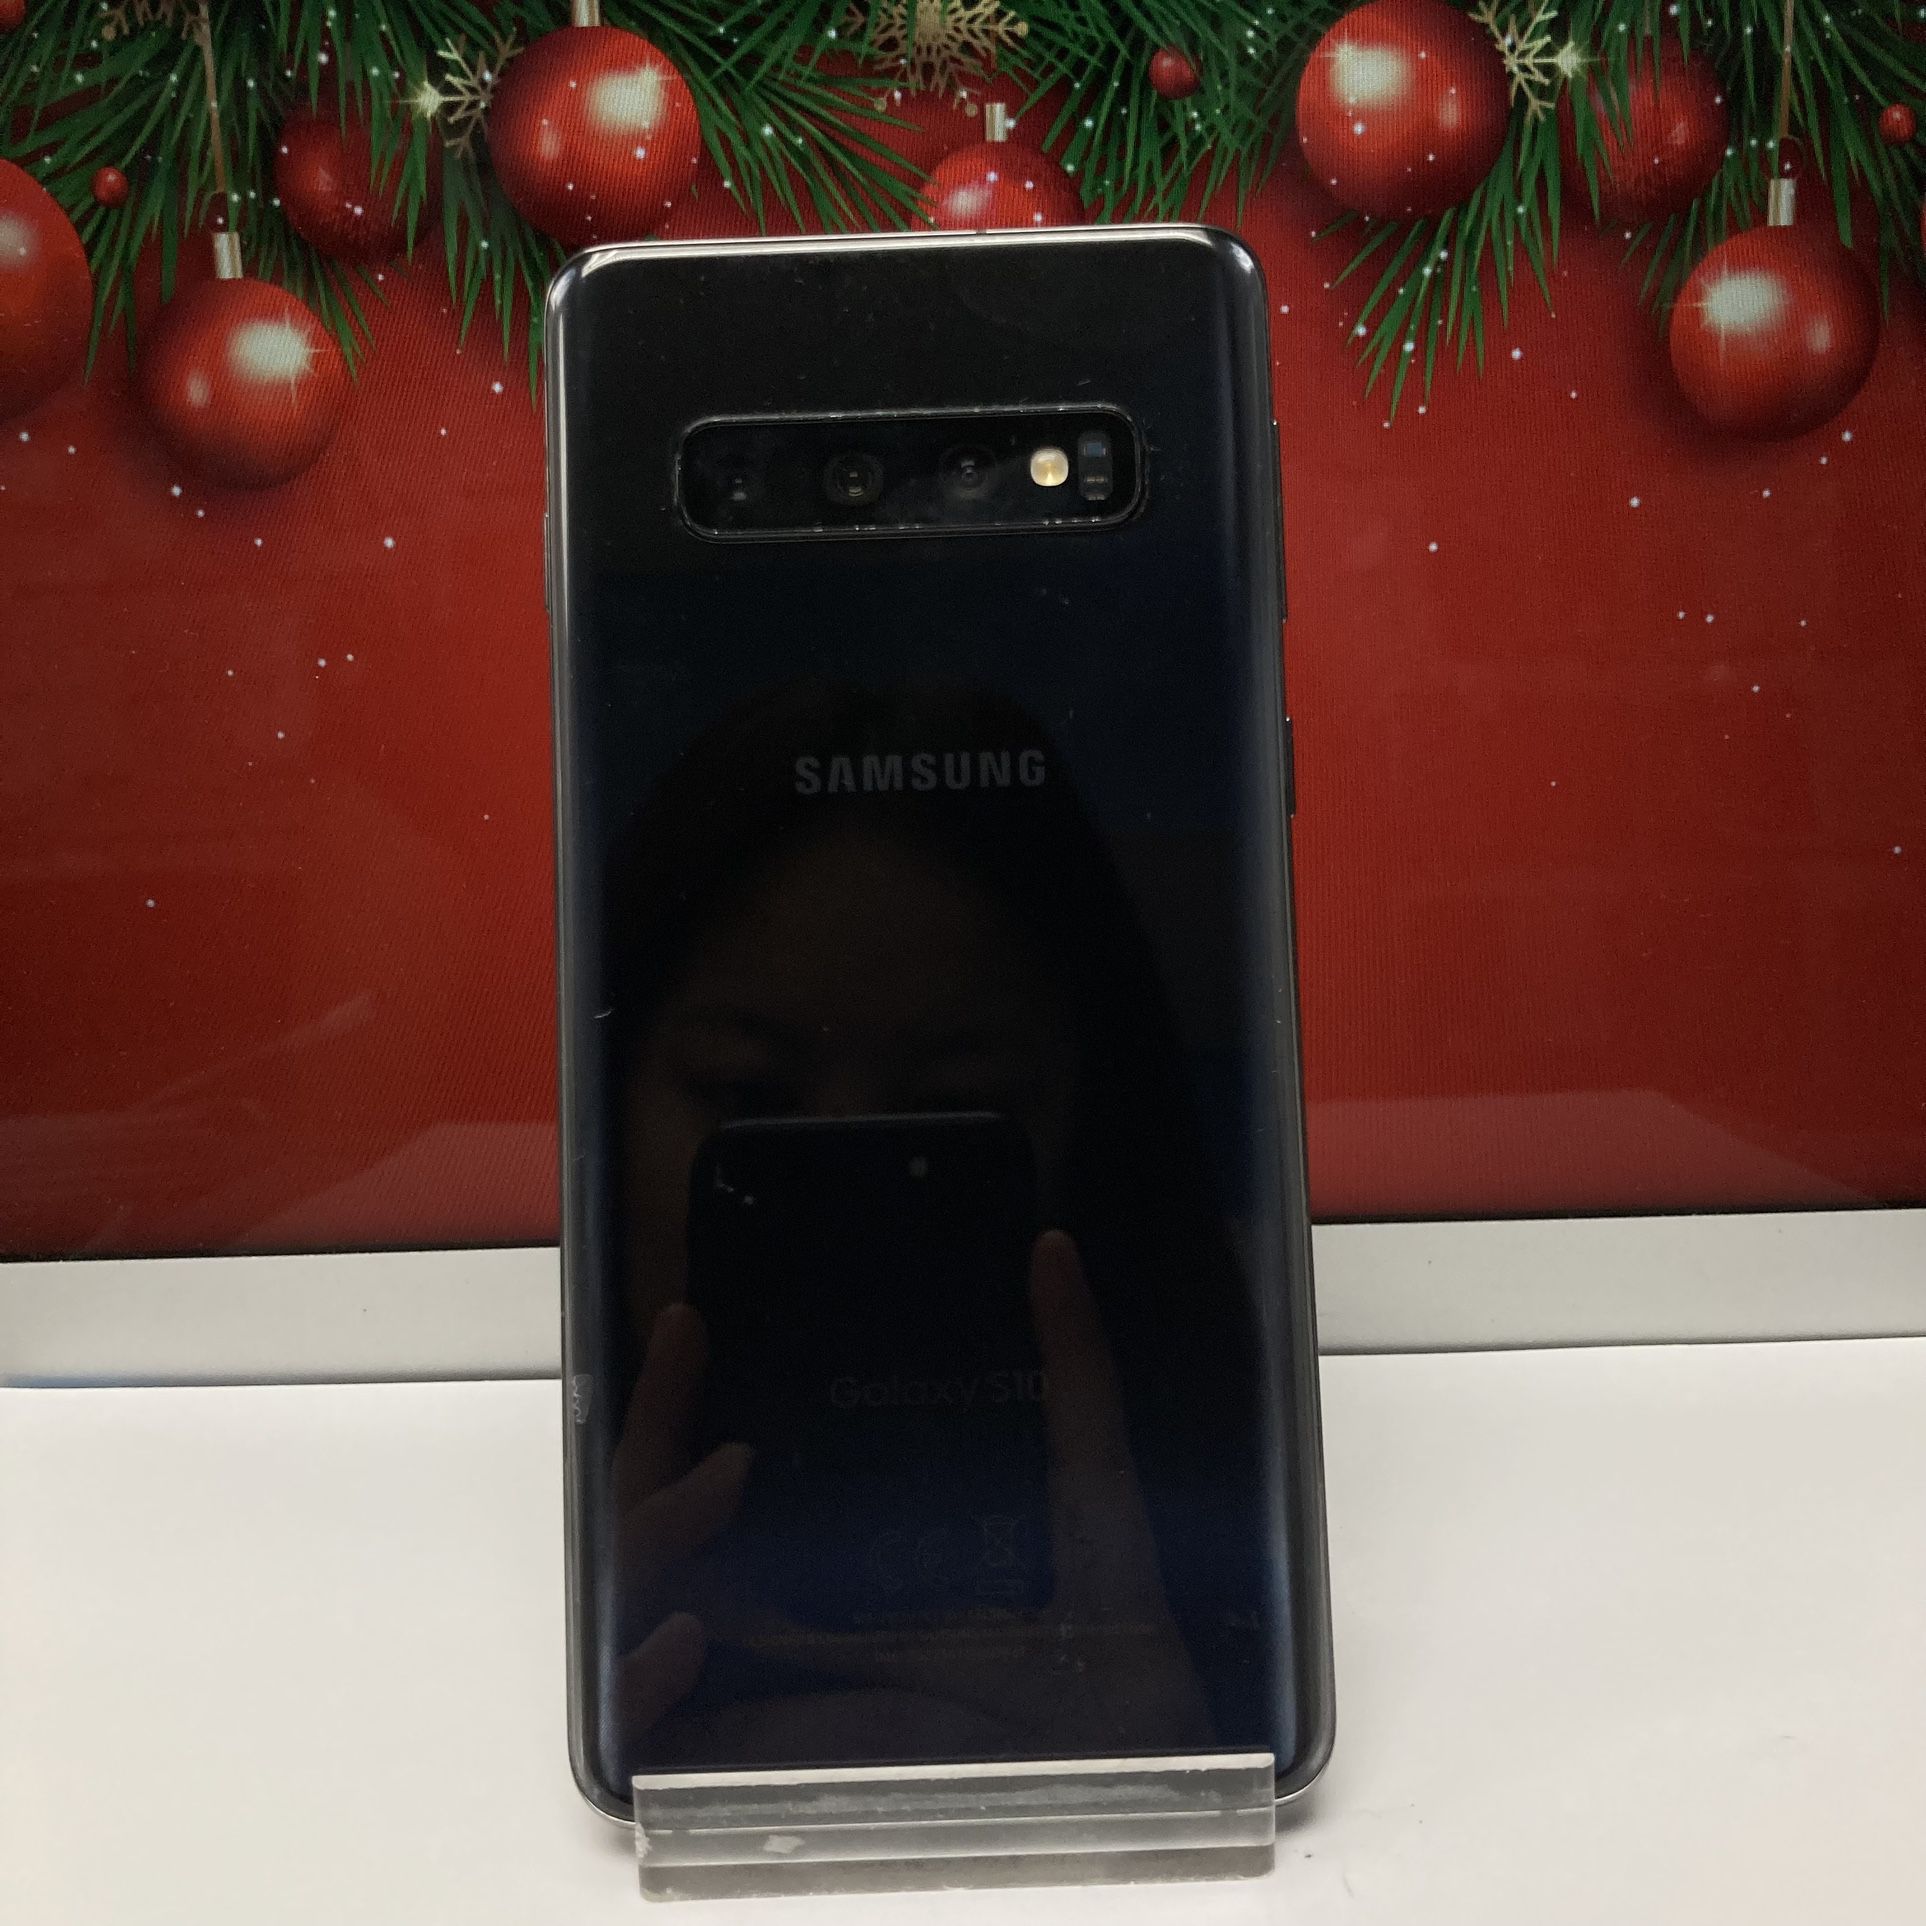 Samsung Galaxy S10, 128 gb, Comes with store warranty along with charger and cable 